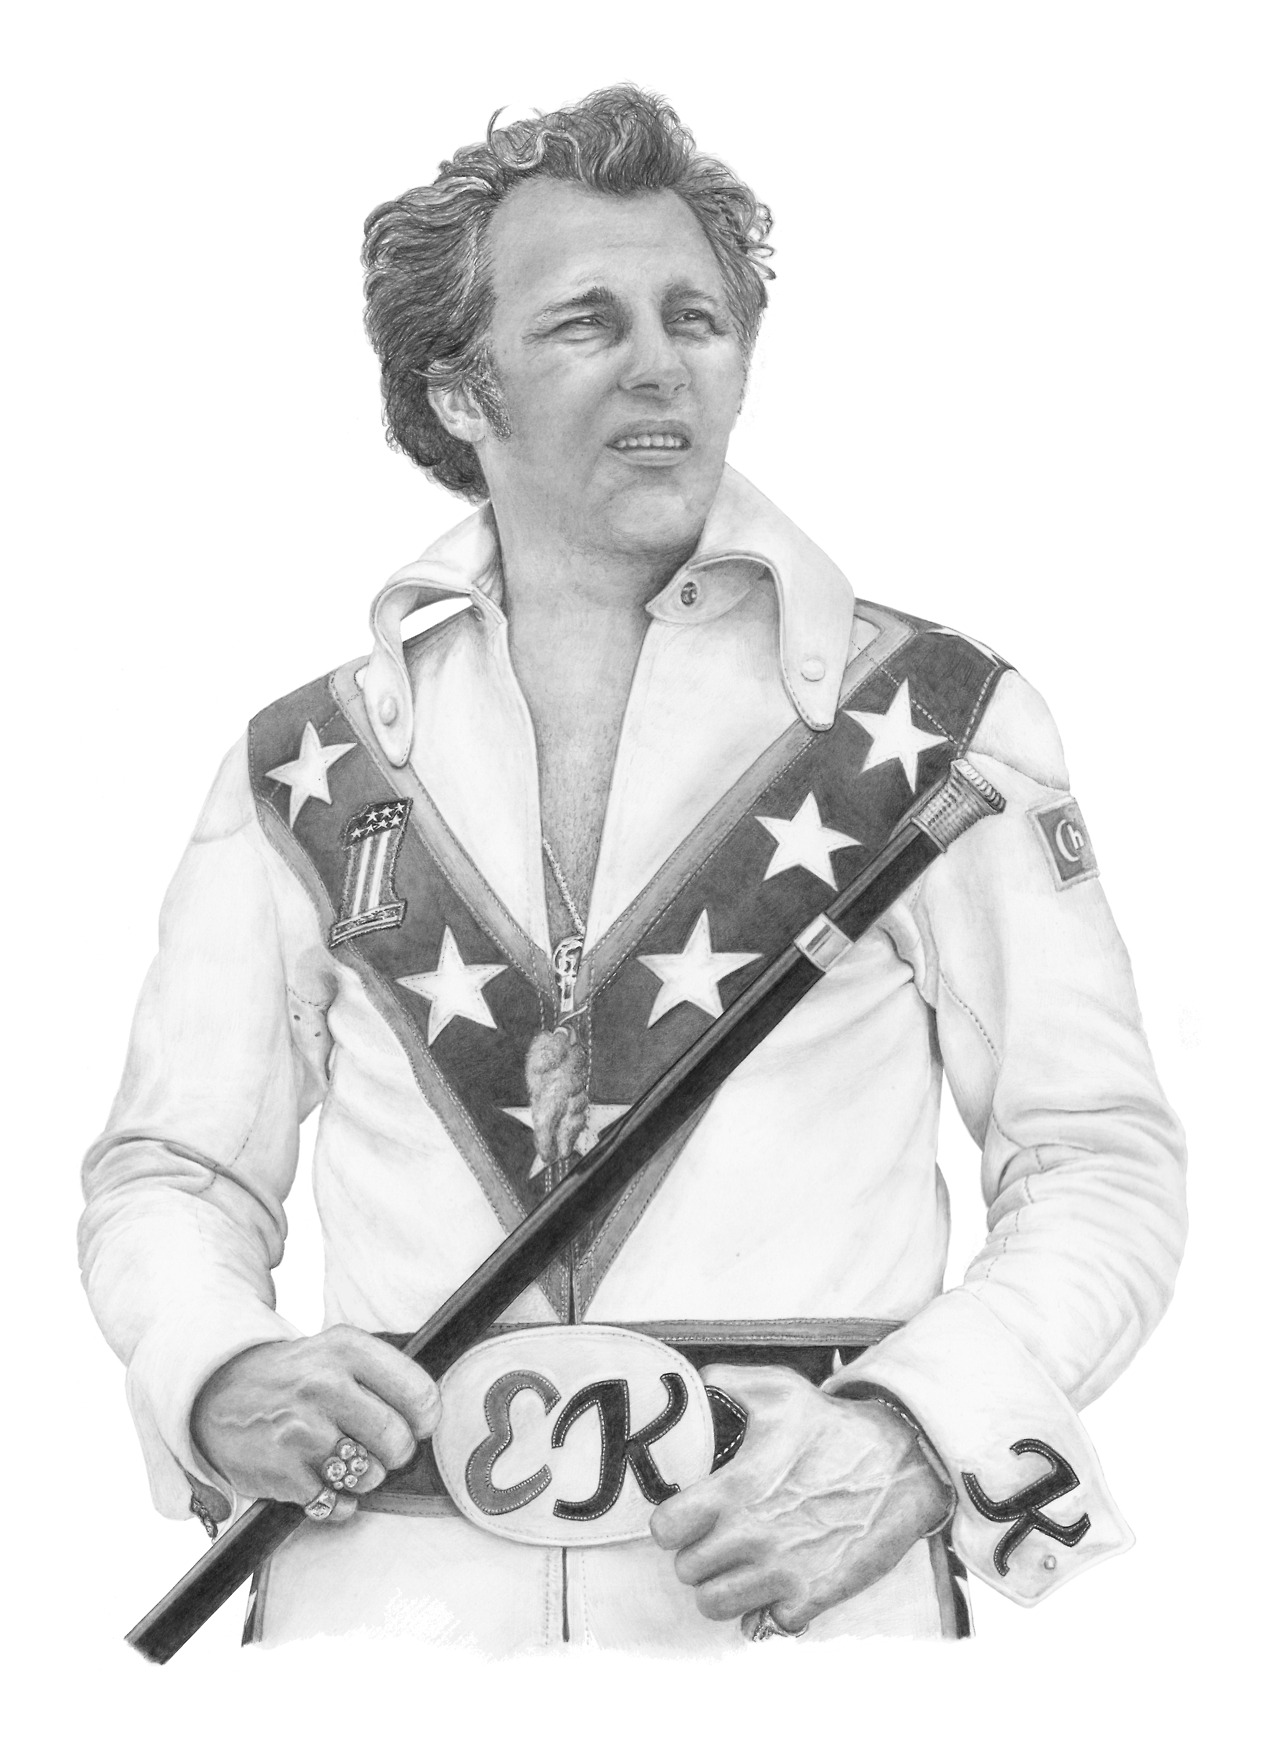 Evel Knievel Graphite Pencil Drawing - A3 size — EatSleepDraw is working on something new and we want you to be the first to know about it. Make sure you’re on our email list.